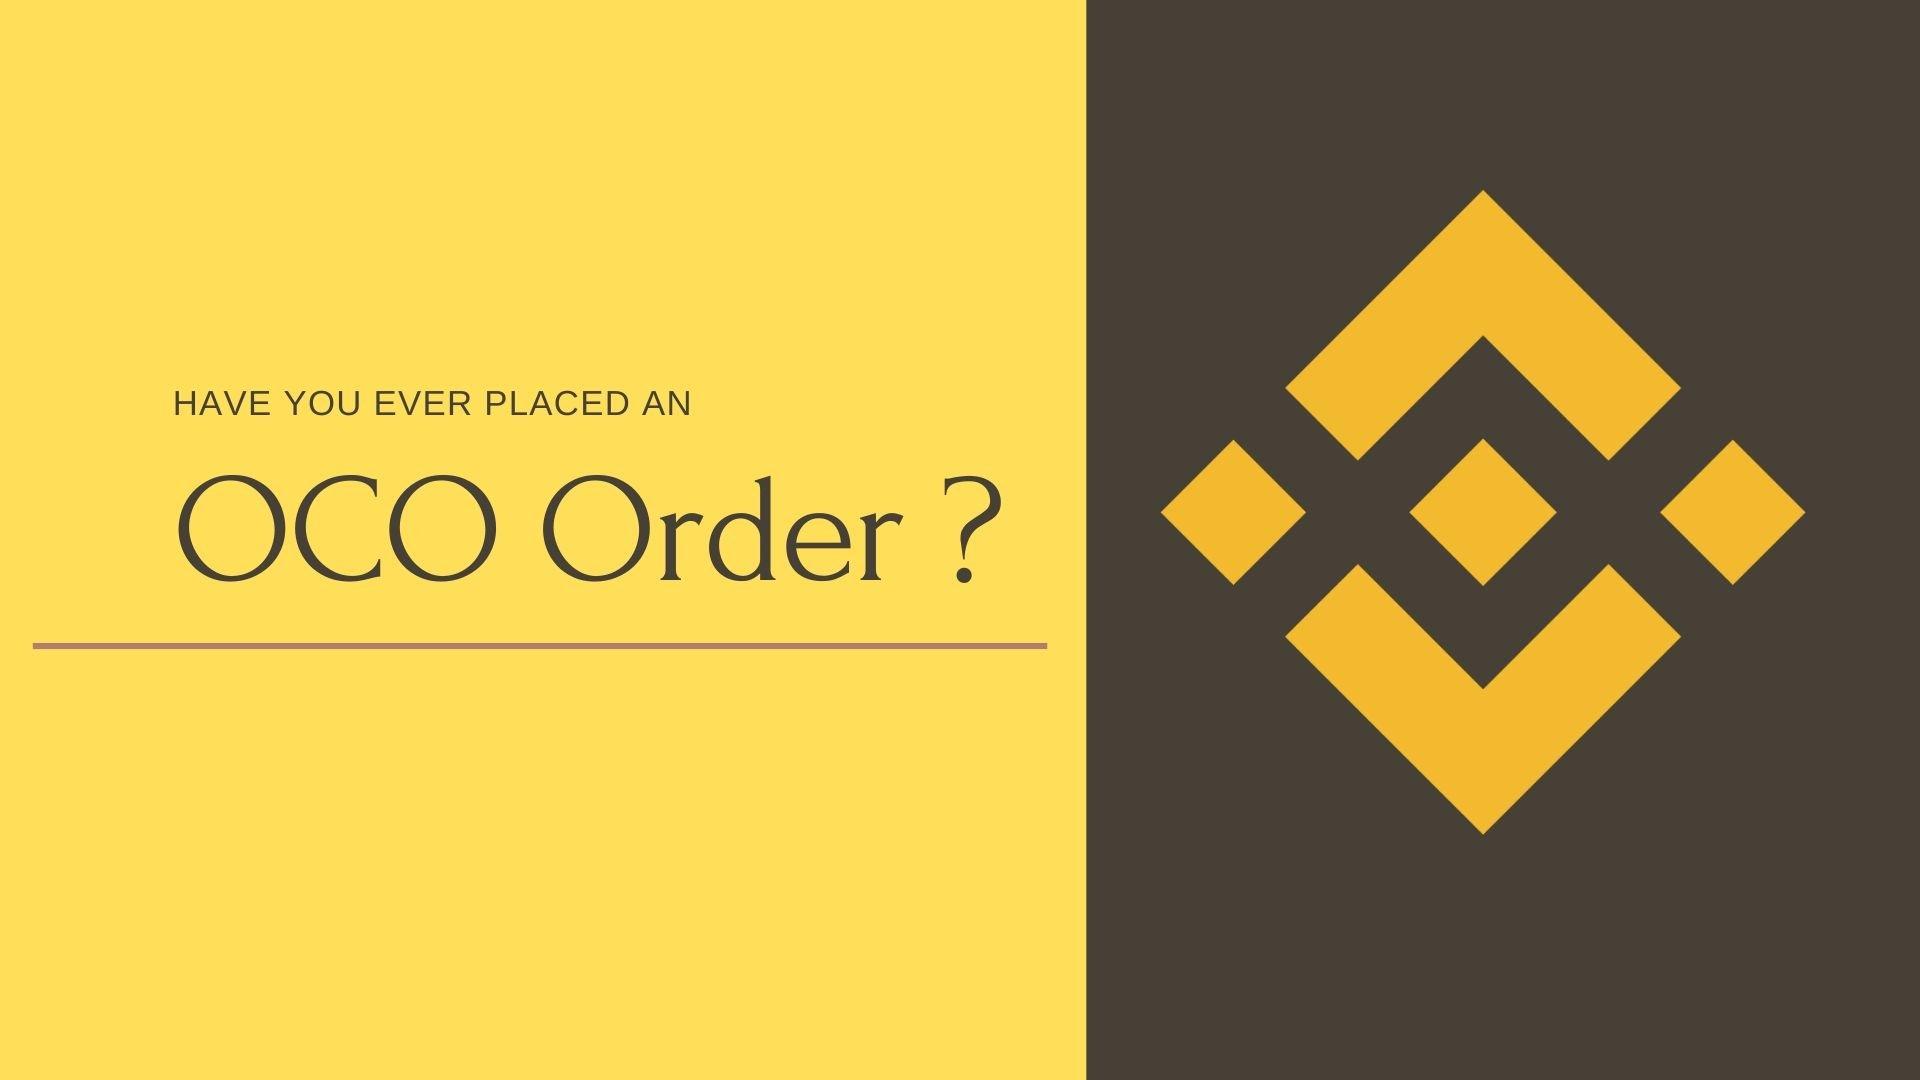 Have You Ever Placed An OCO Order?